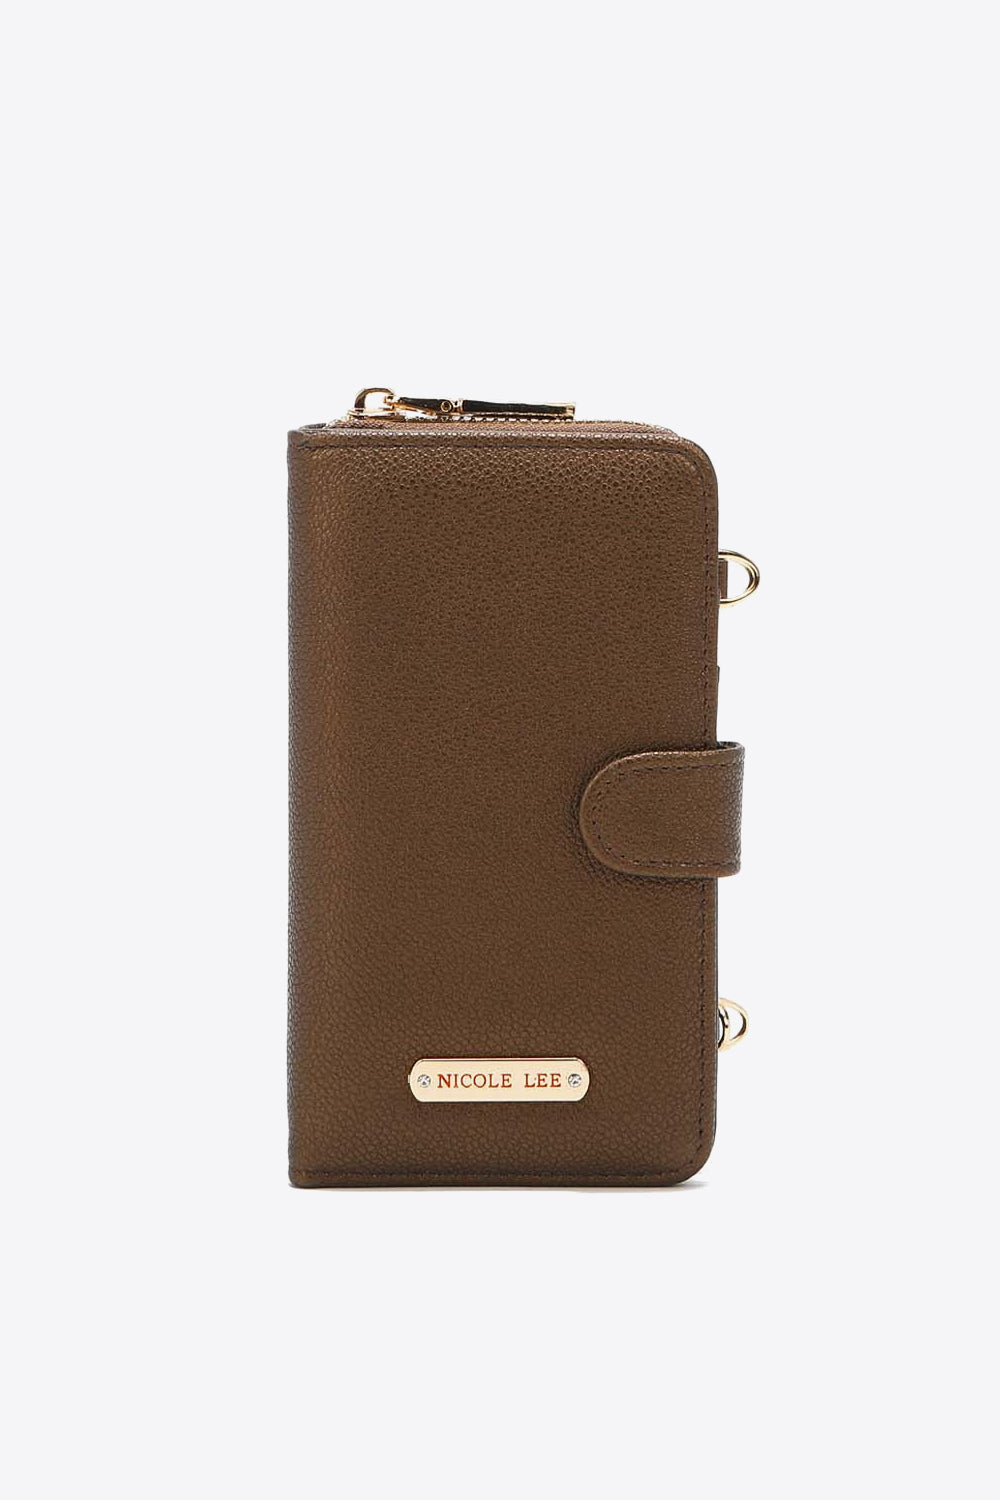 Nicole Lee USA Phone Case Wallet Vegan Leather Crossbody Cell Phone Case Wallet Various Colors, Black, Red, Mustard, Sage, Gray, Wine, Chestnut